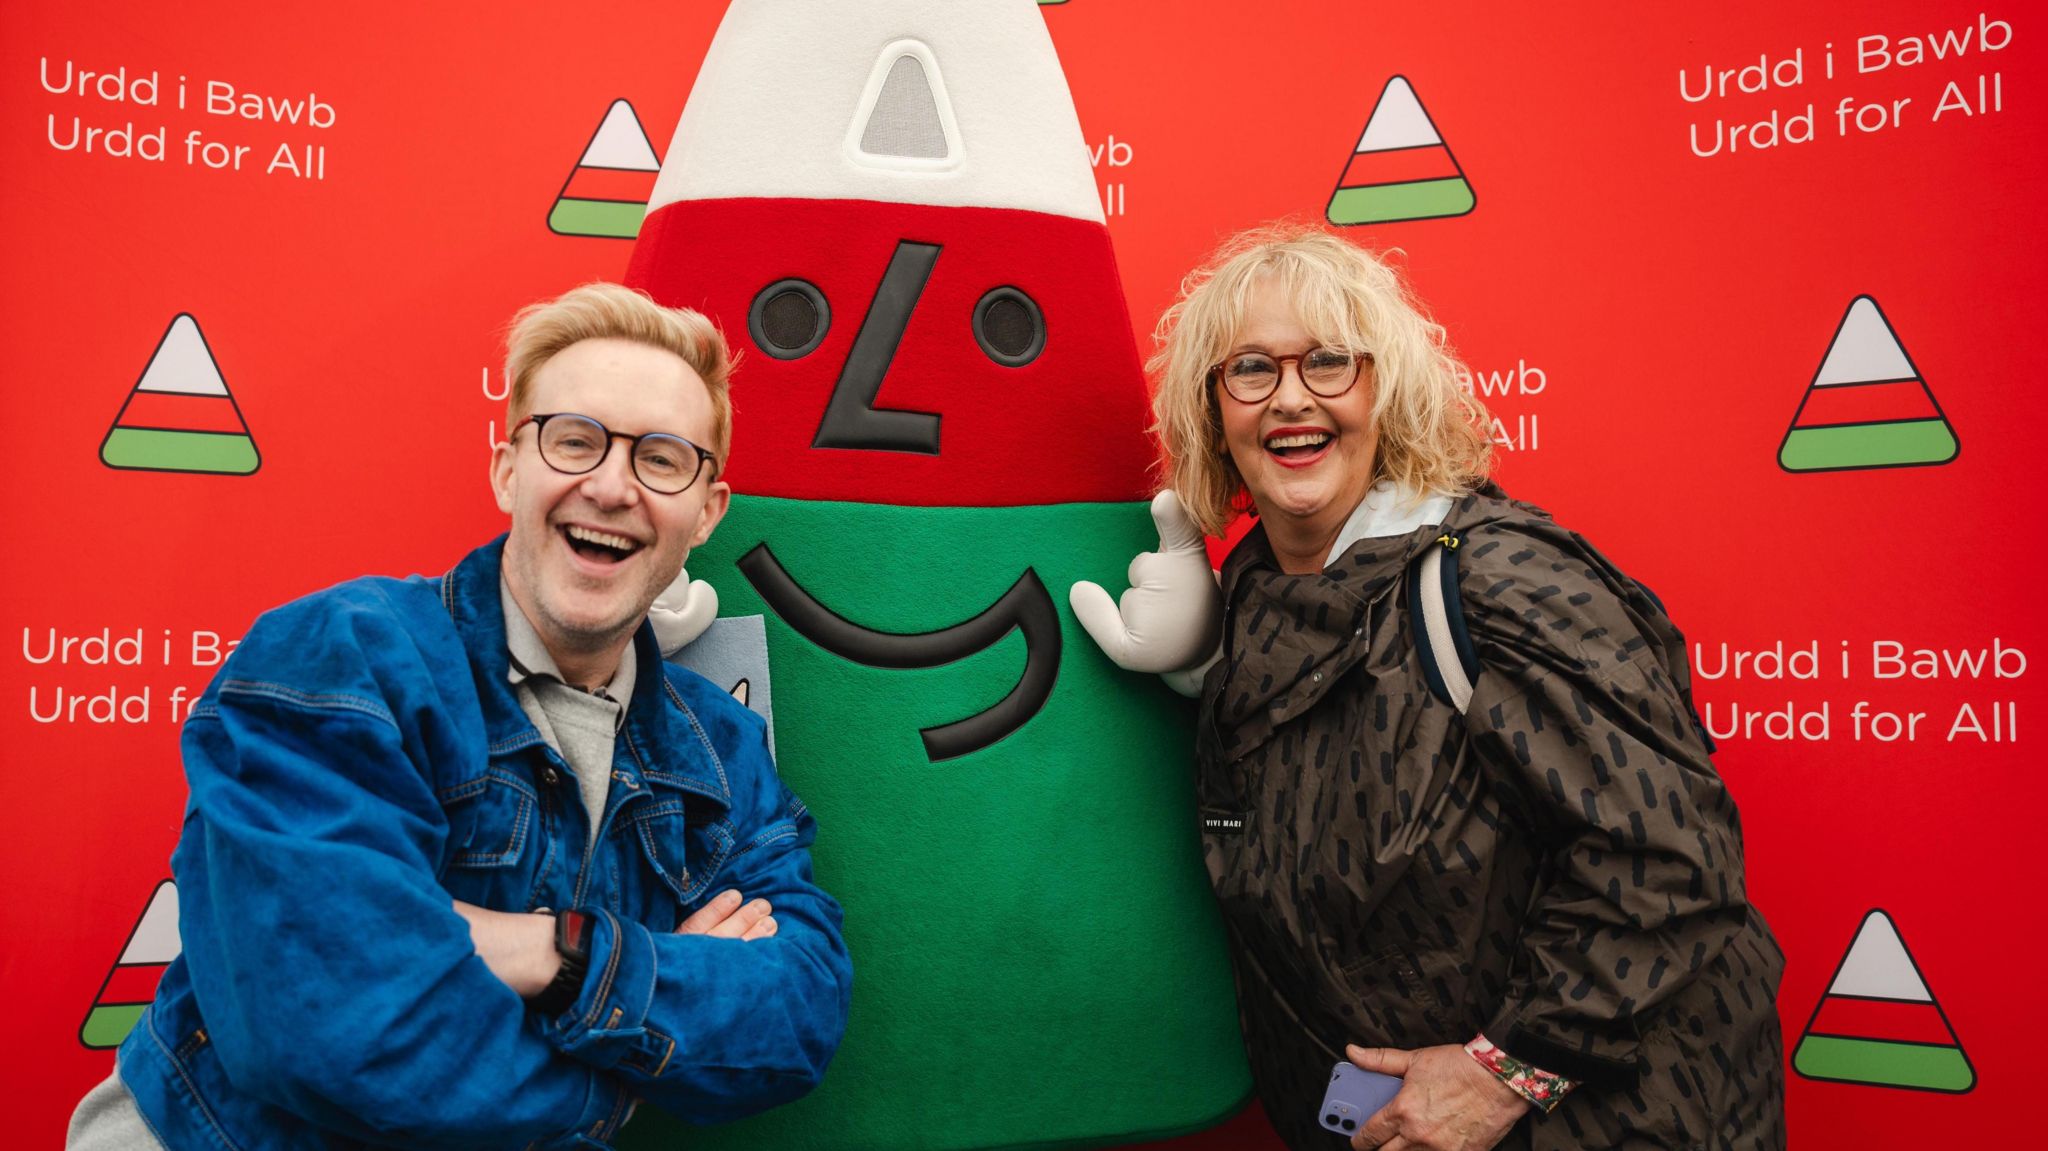 H from Steps and Caryl Parry Jones with the Urdd mascot Mistar Urdd